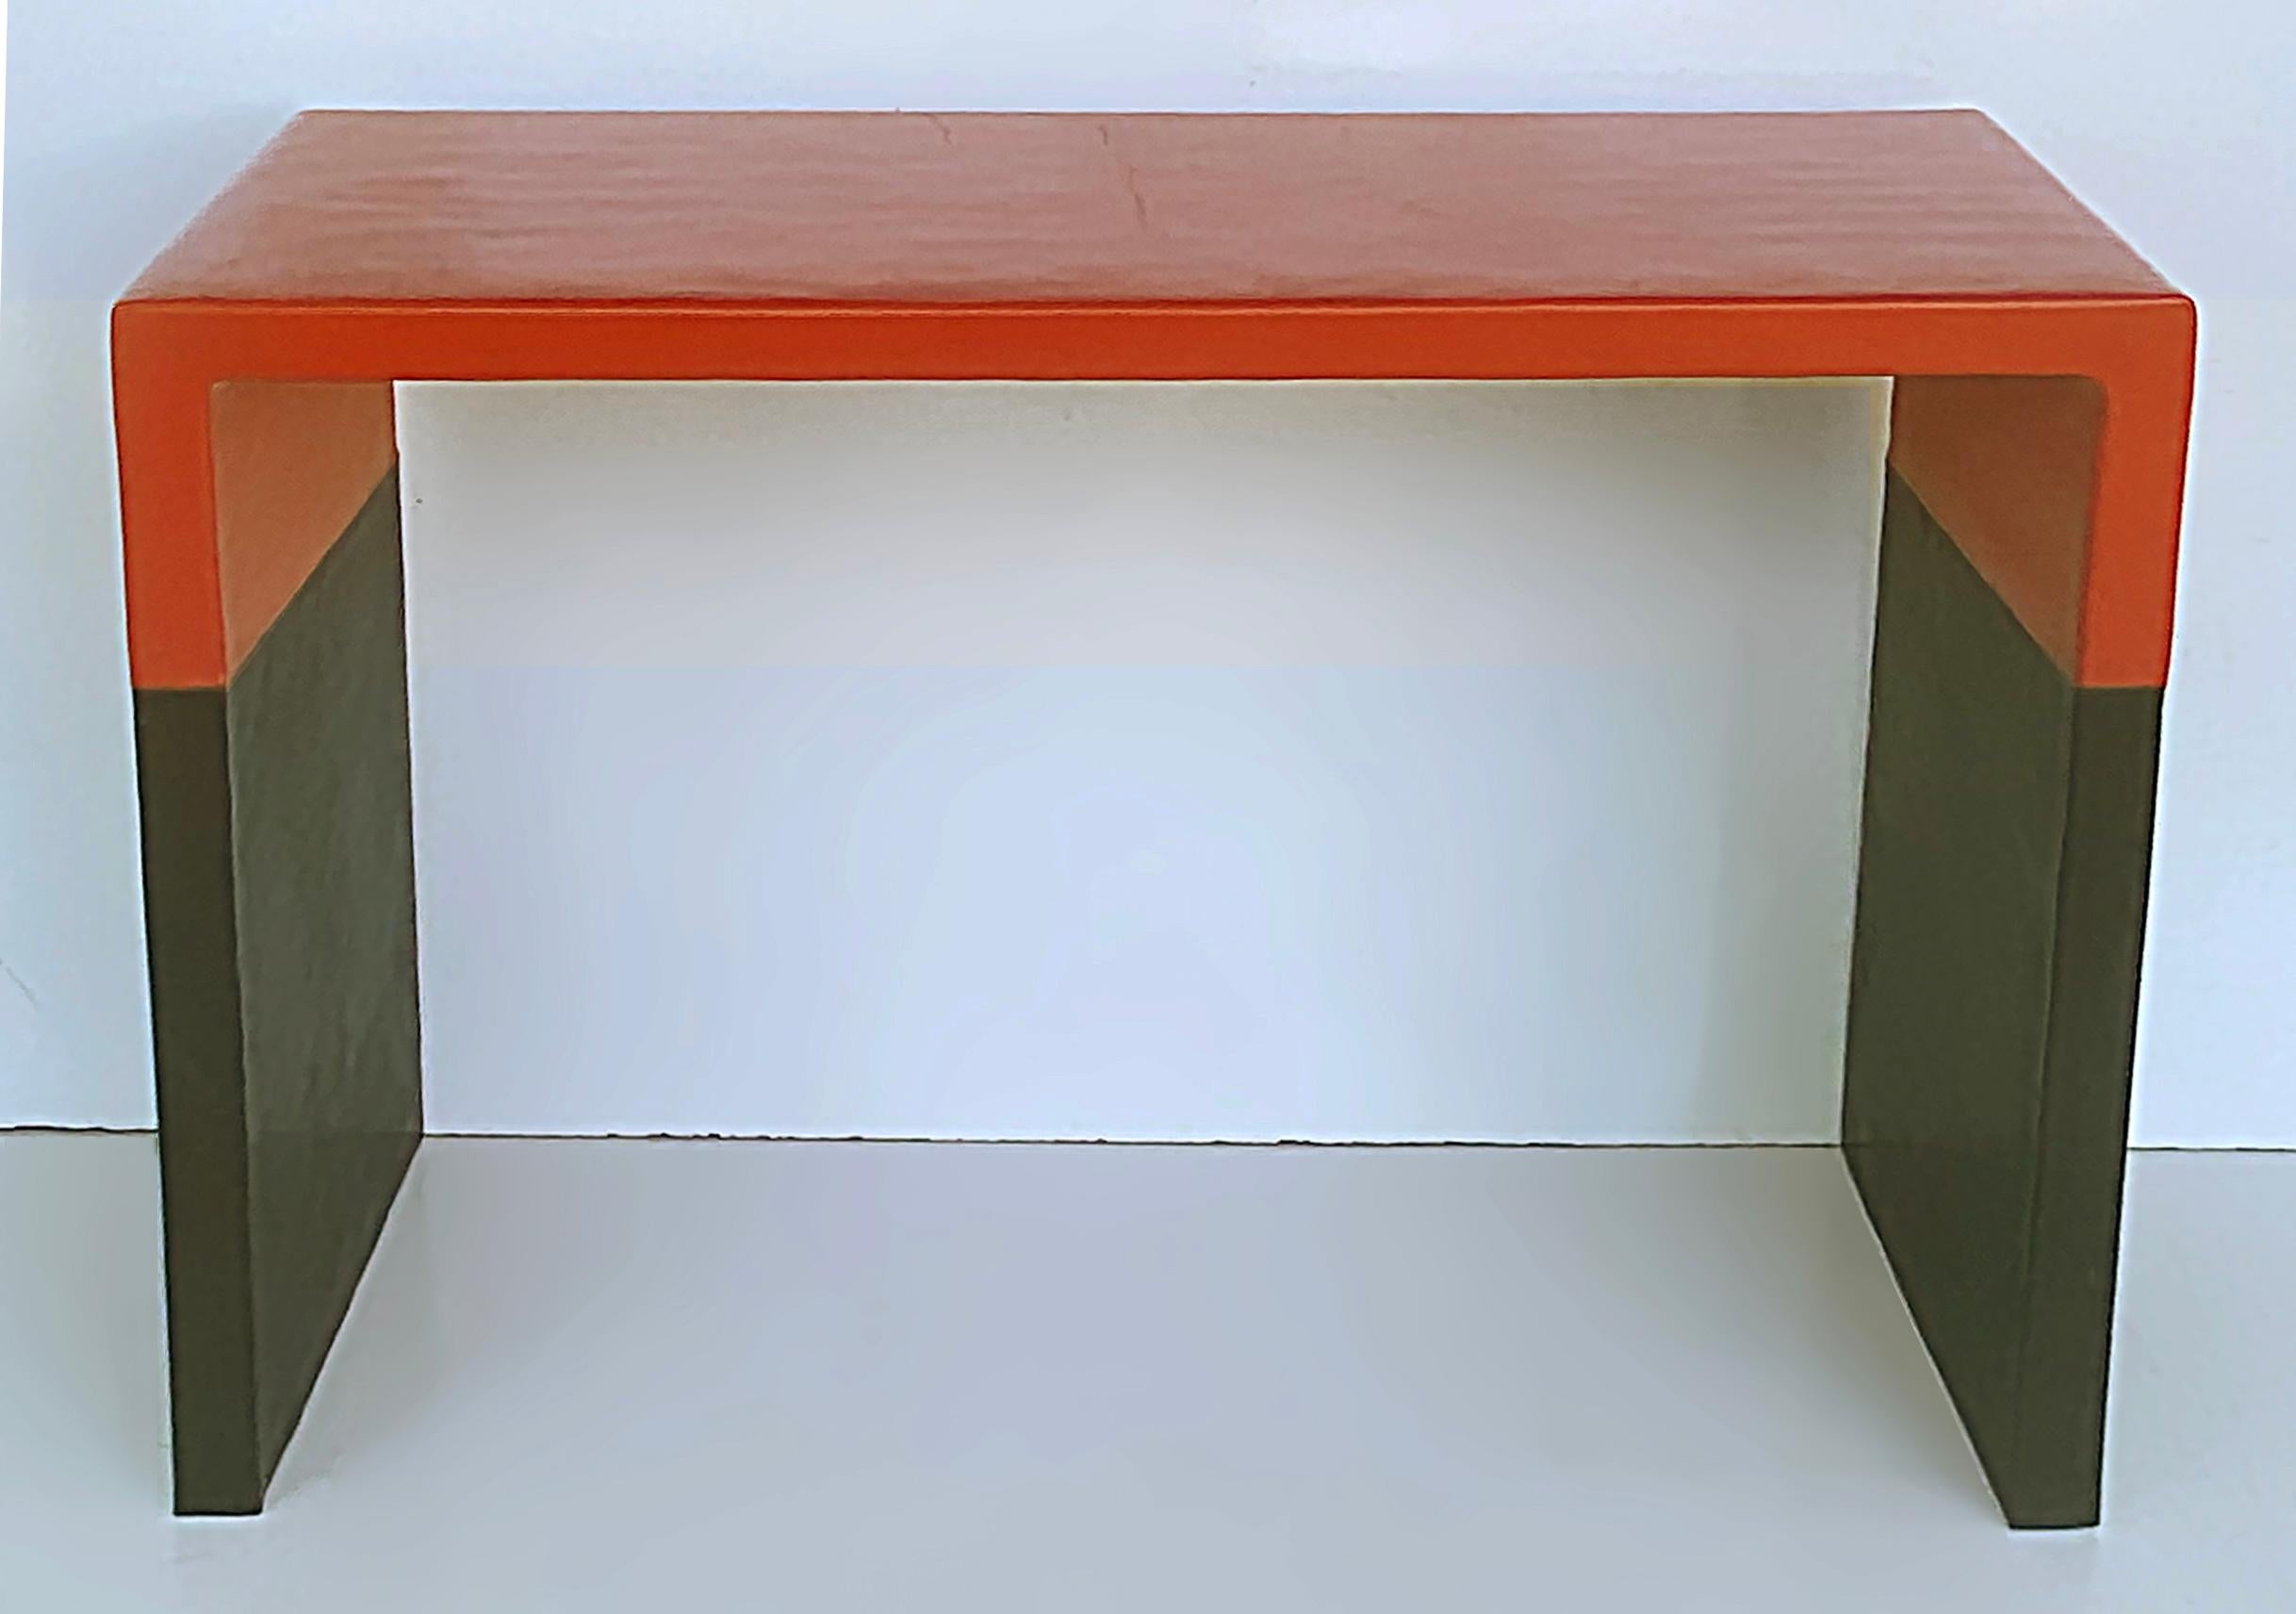 Modern Robert Kuo Baker Furniture Lacquer, Copper Console Table, One-Off, circa 2000 For Sale